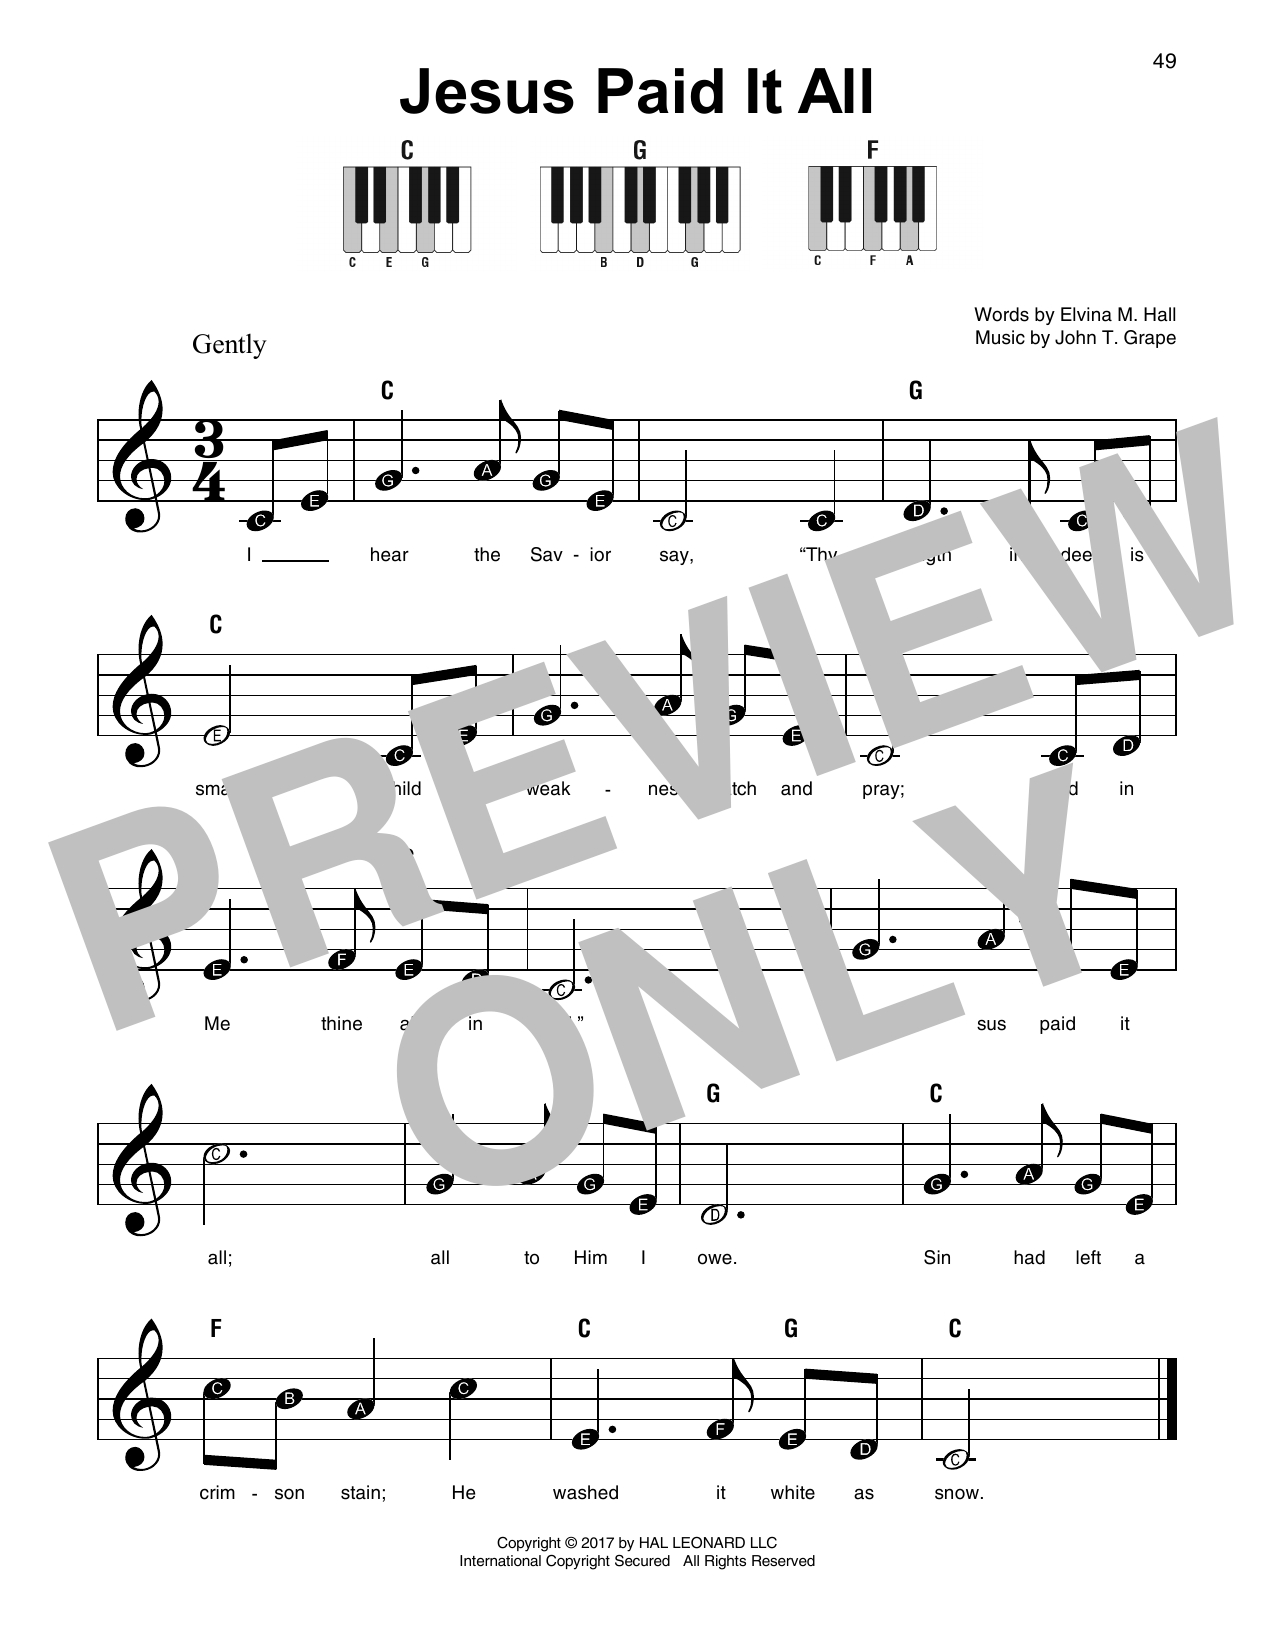 Jesus Paid It All Chords Jesus Paid It All Sheet Music John T Grape Super Easy Piano